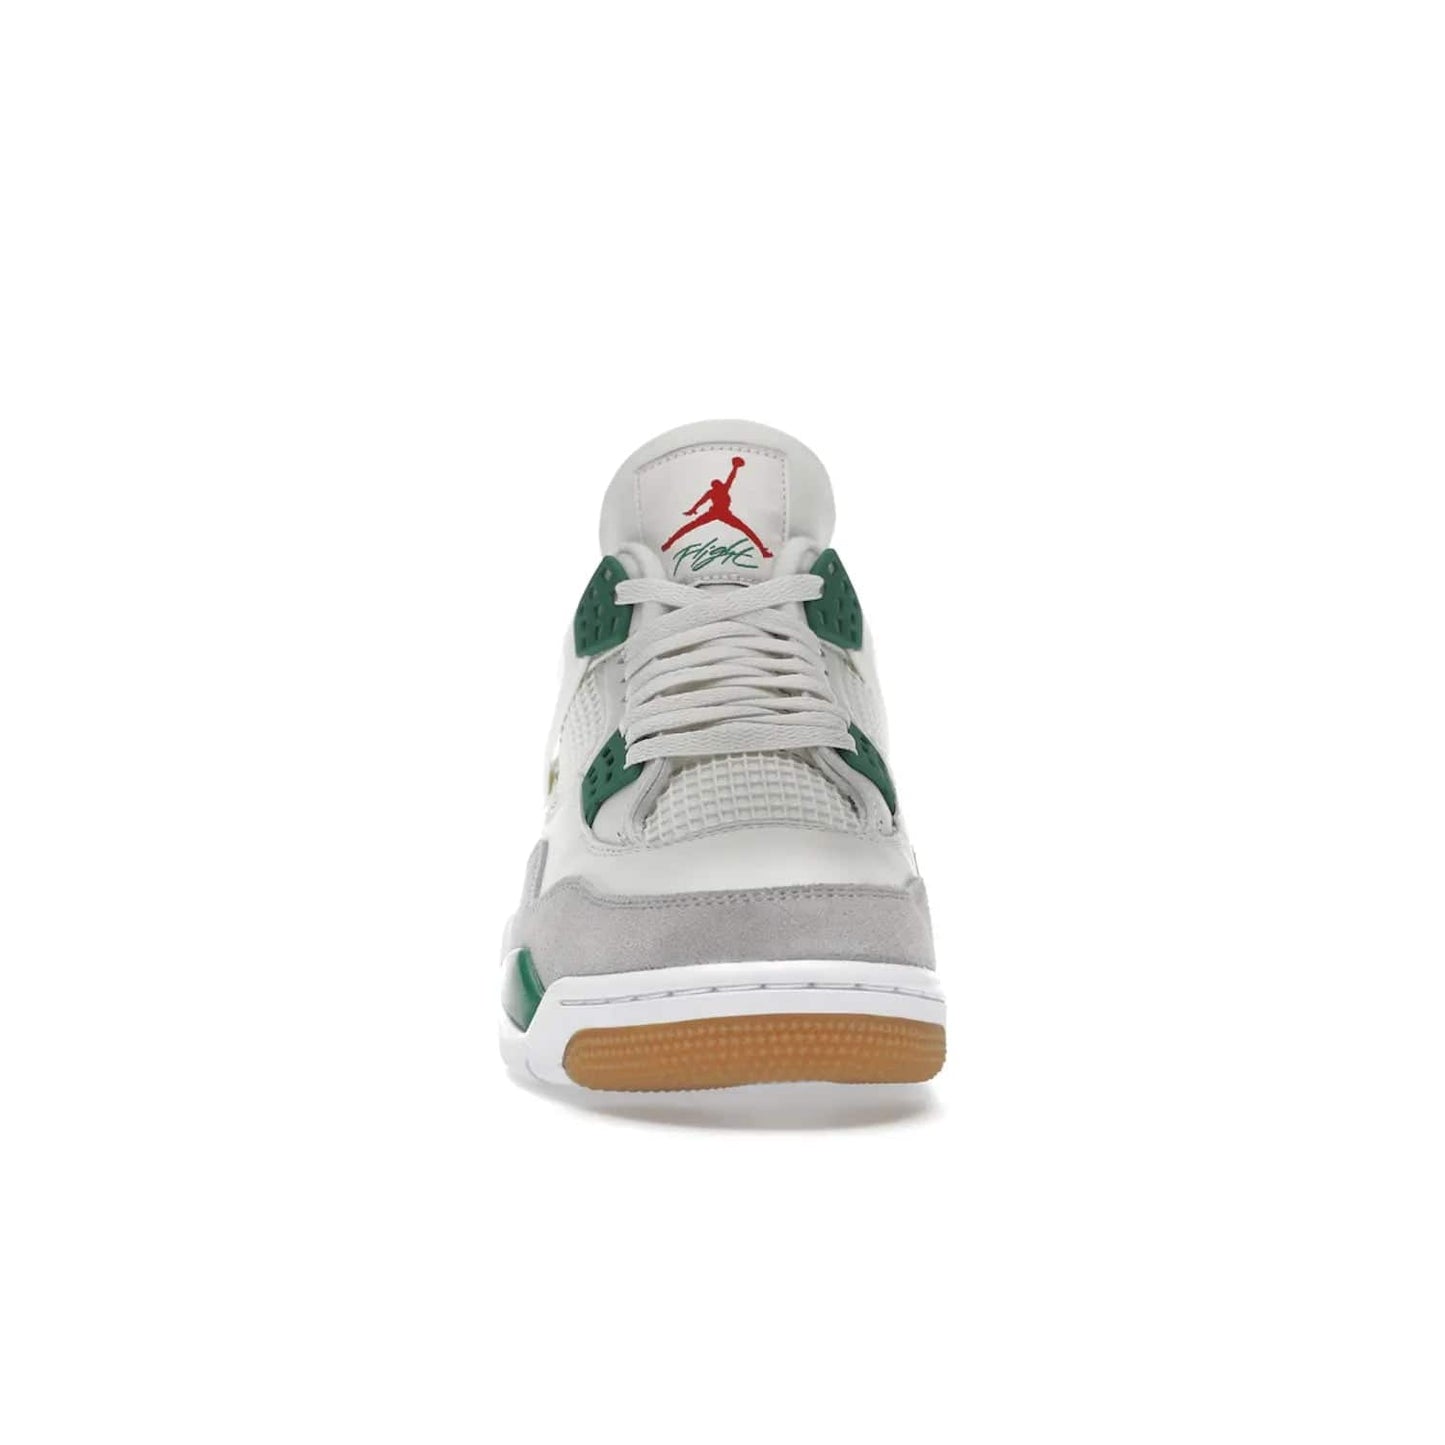 Jordan 4 Retro SB Pine Green - Image 10 - Only at www.BallersClubKickz.com - A white leather upper combined with a Neutral Grey suede mudguard gives this limited Air Jordan 4 Retro SB Pine Green sneaker its unmistakable style. Released March 20, 2023, the Jordan 4 Retro SB features a white and Pine Green midsole plus a red air unit with a gum outsole for grip. The perfect blend of Nike SB skateboarding and Jordan 4 classic design.